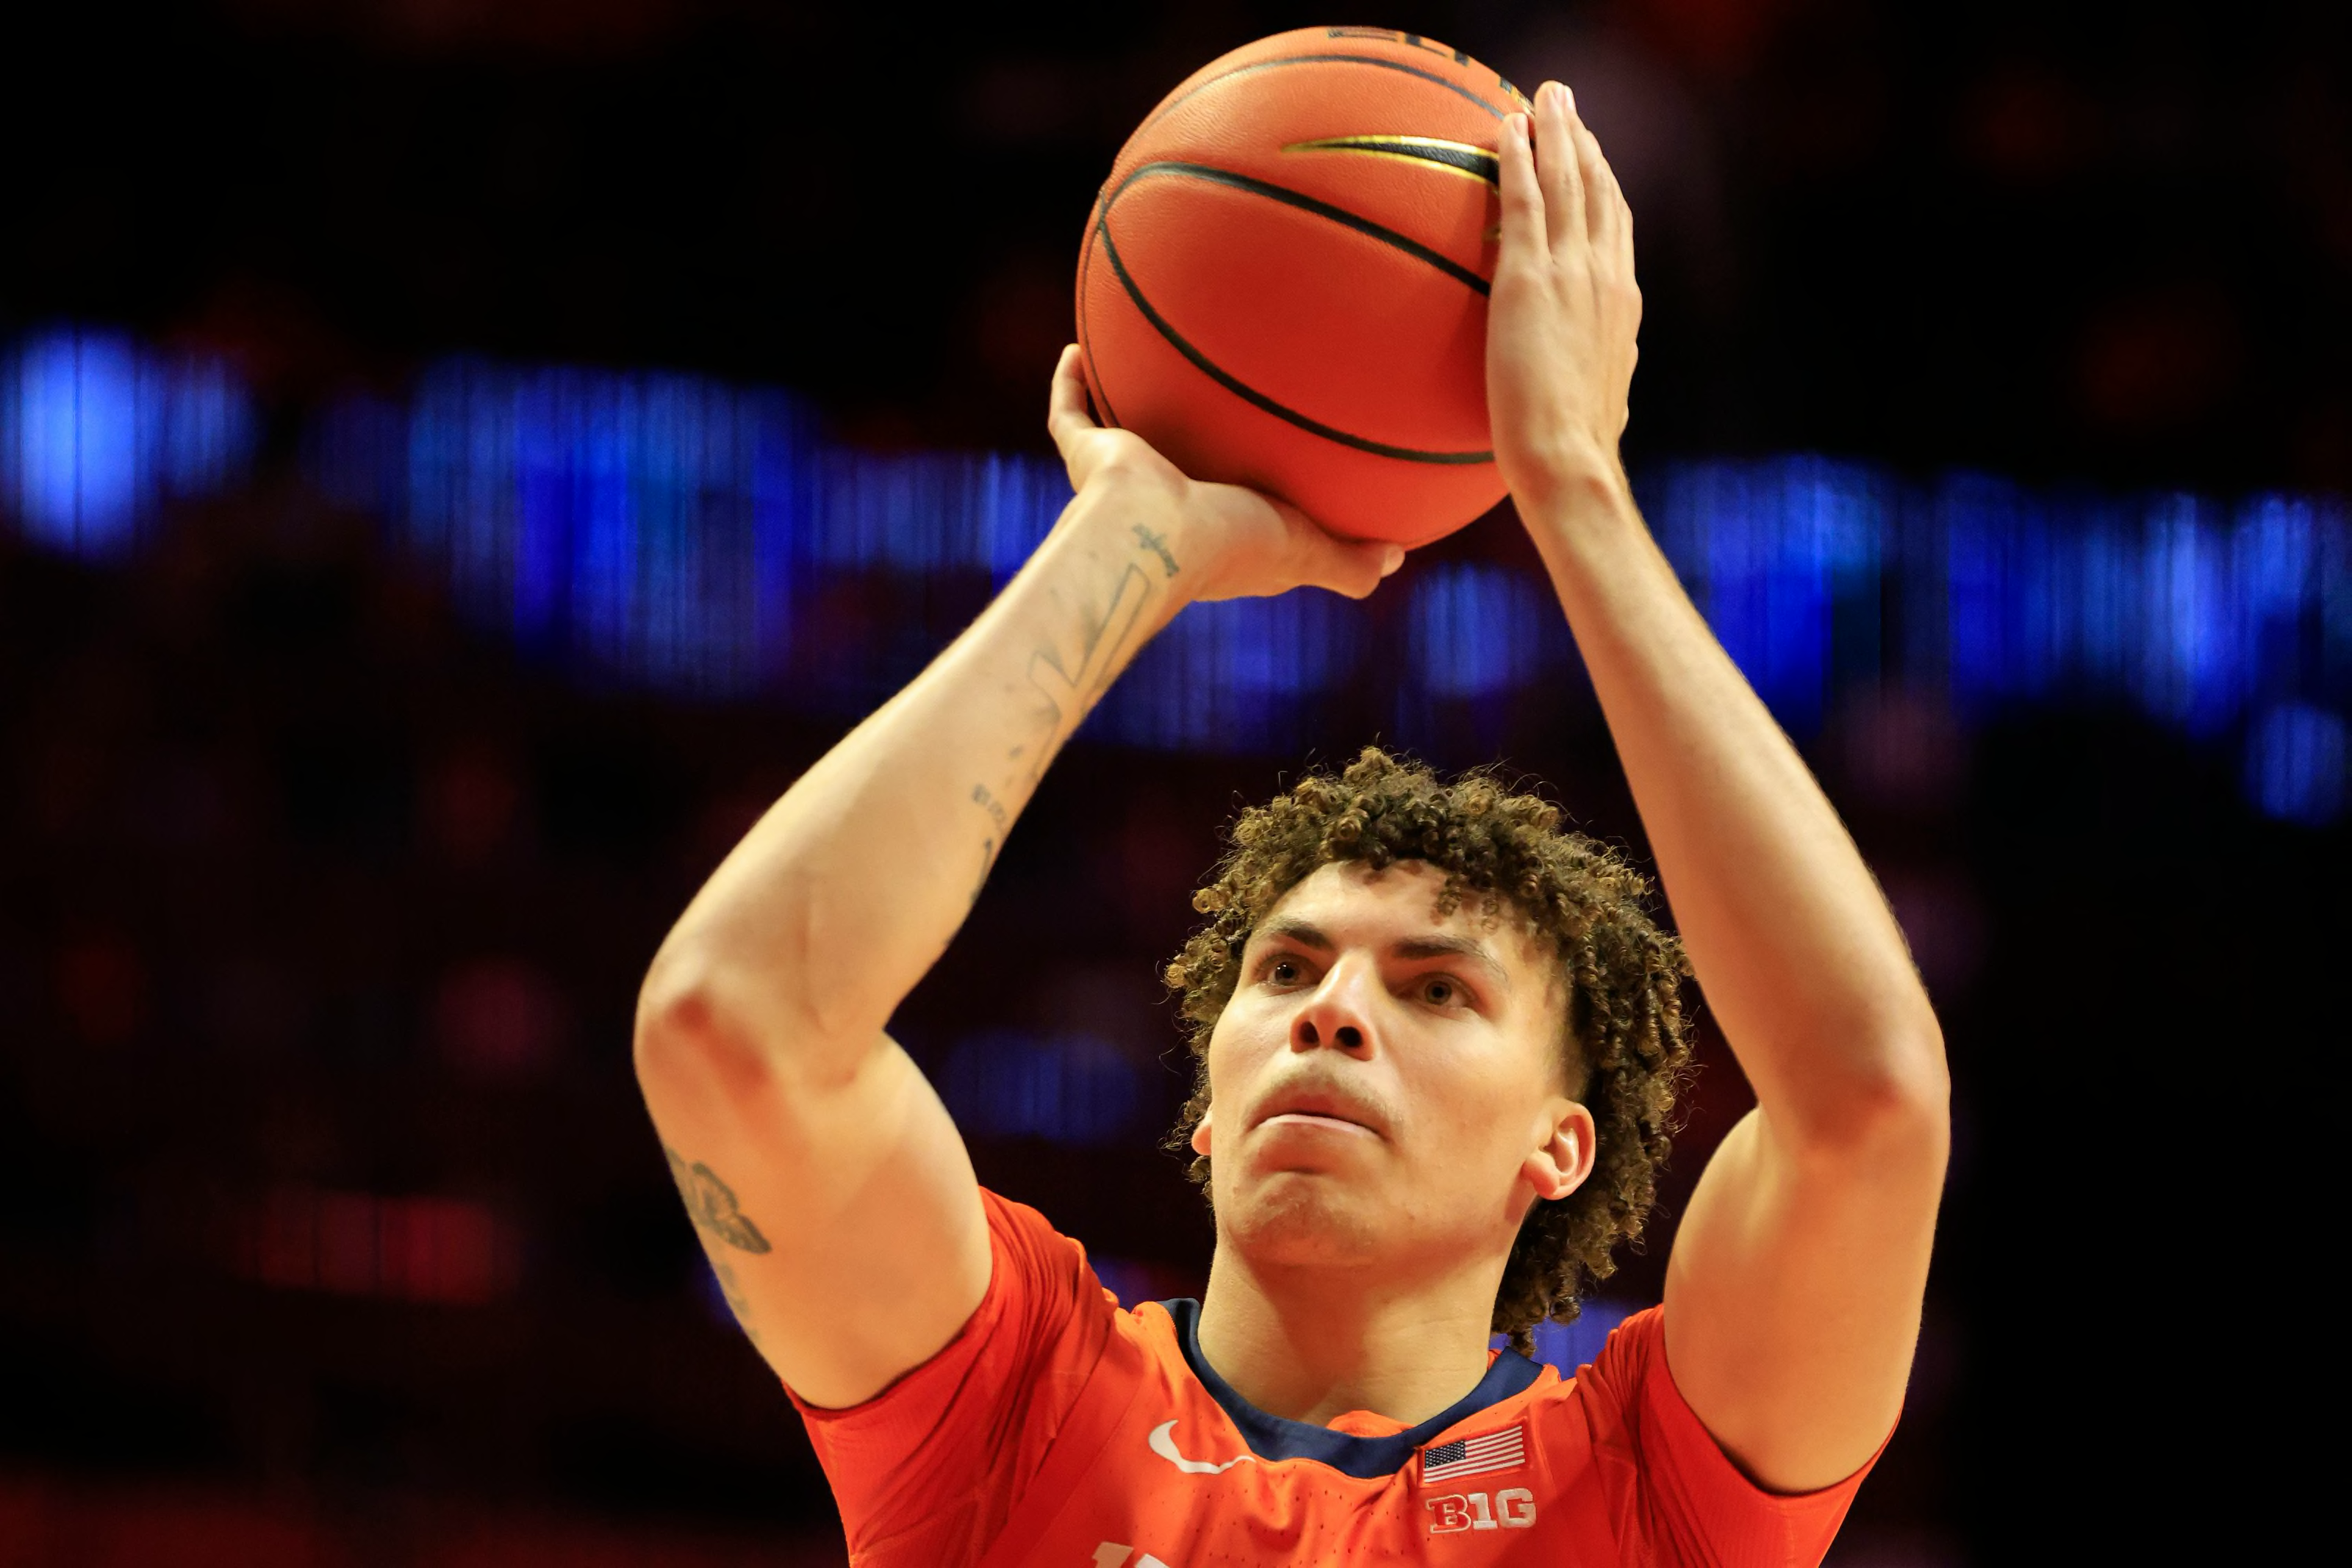 Illinois Basketball 3 things to watch for in the Illini game against Ohio State